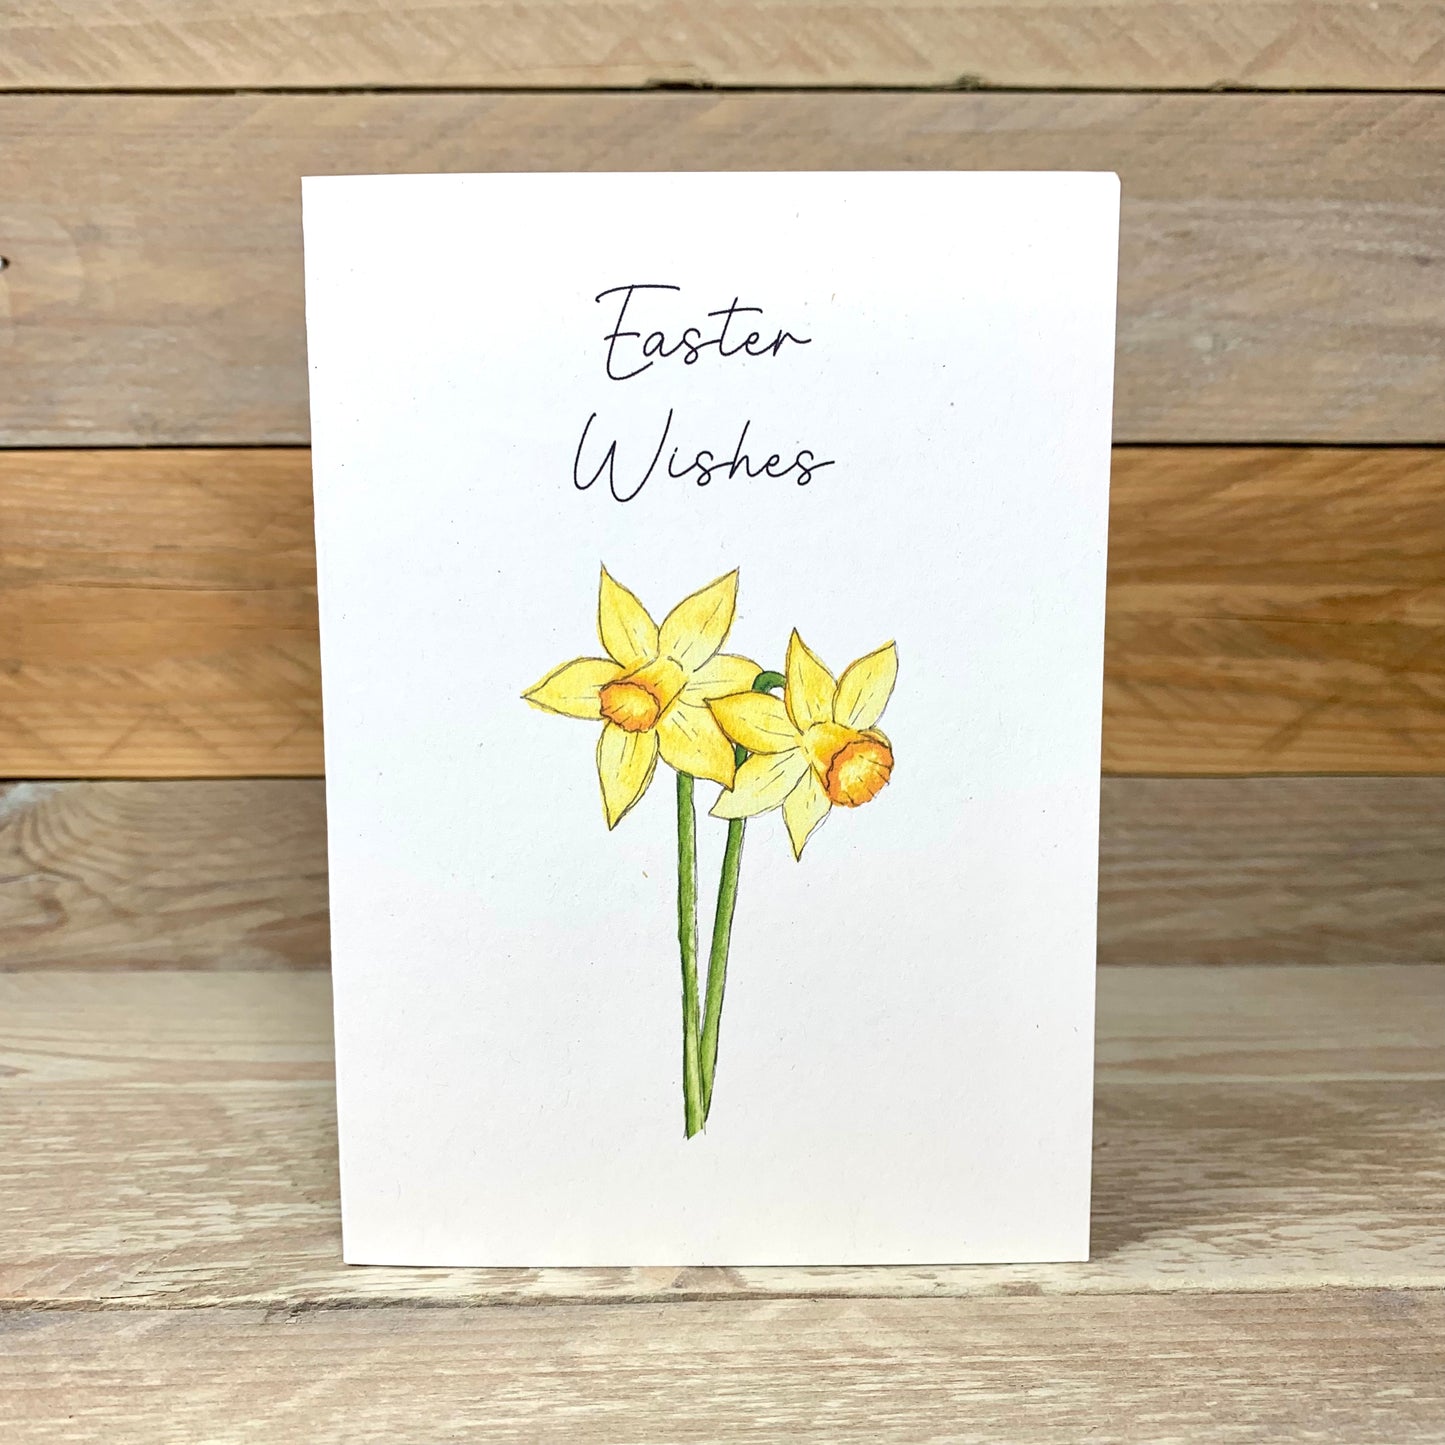 Daffodils at Easter Notelet